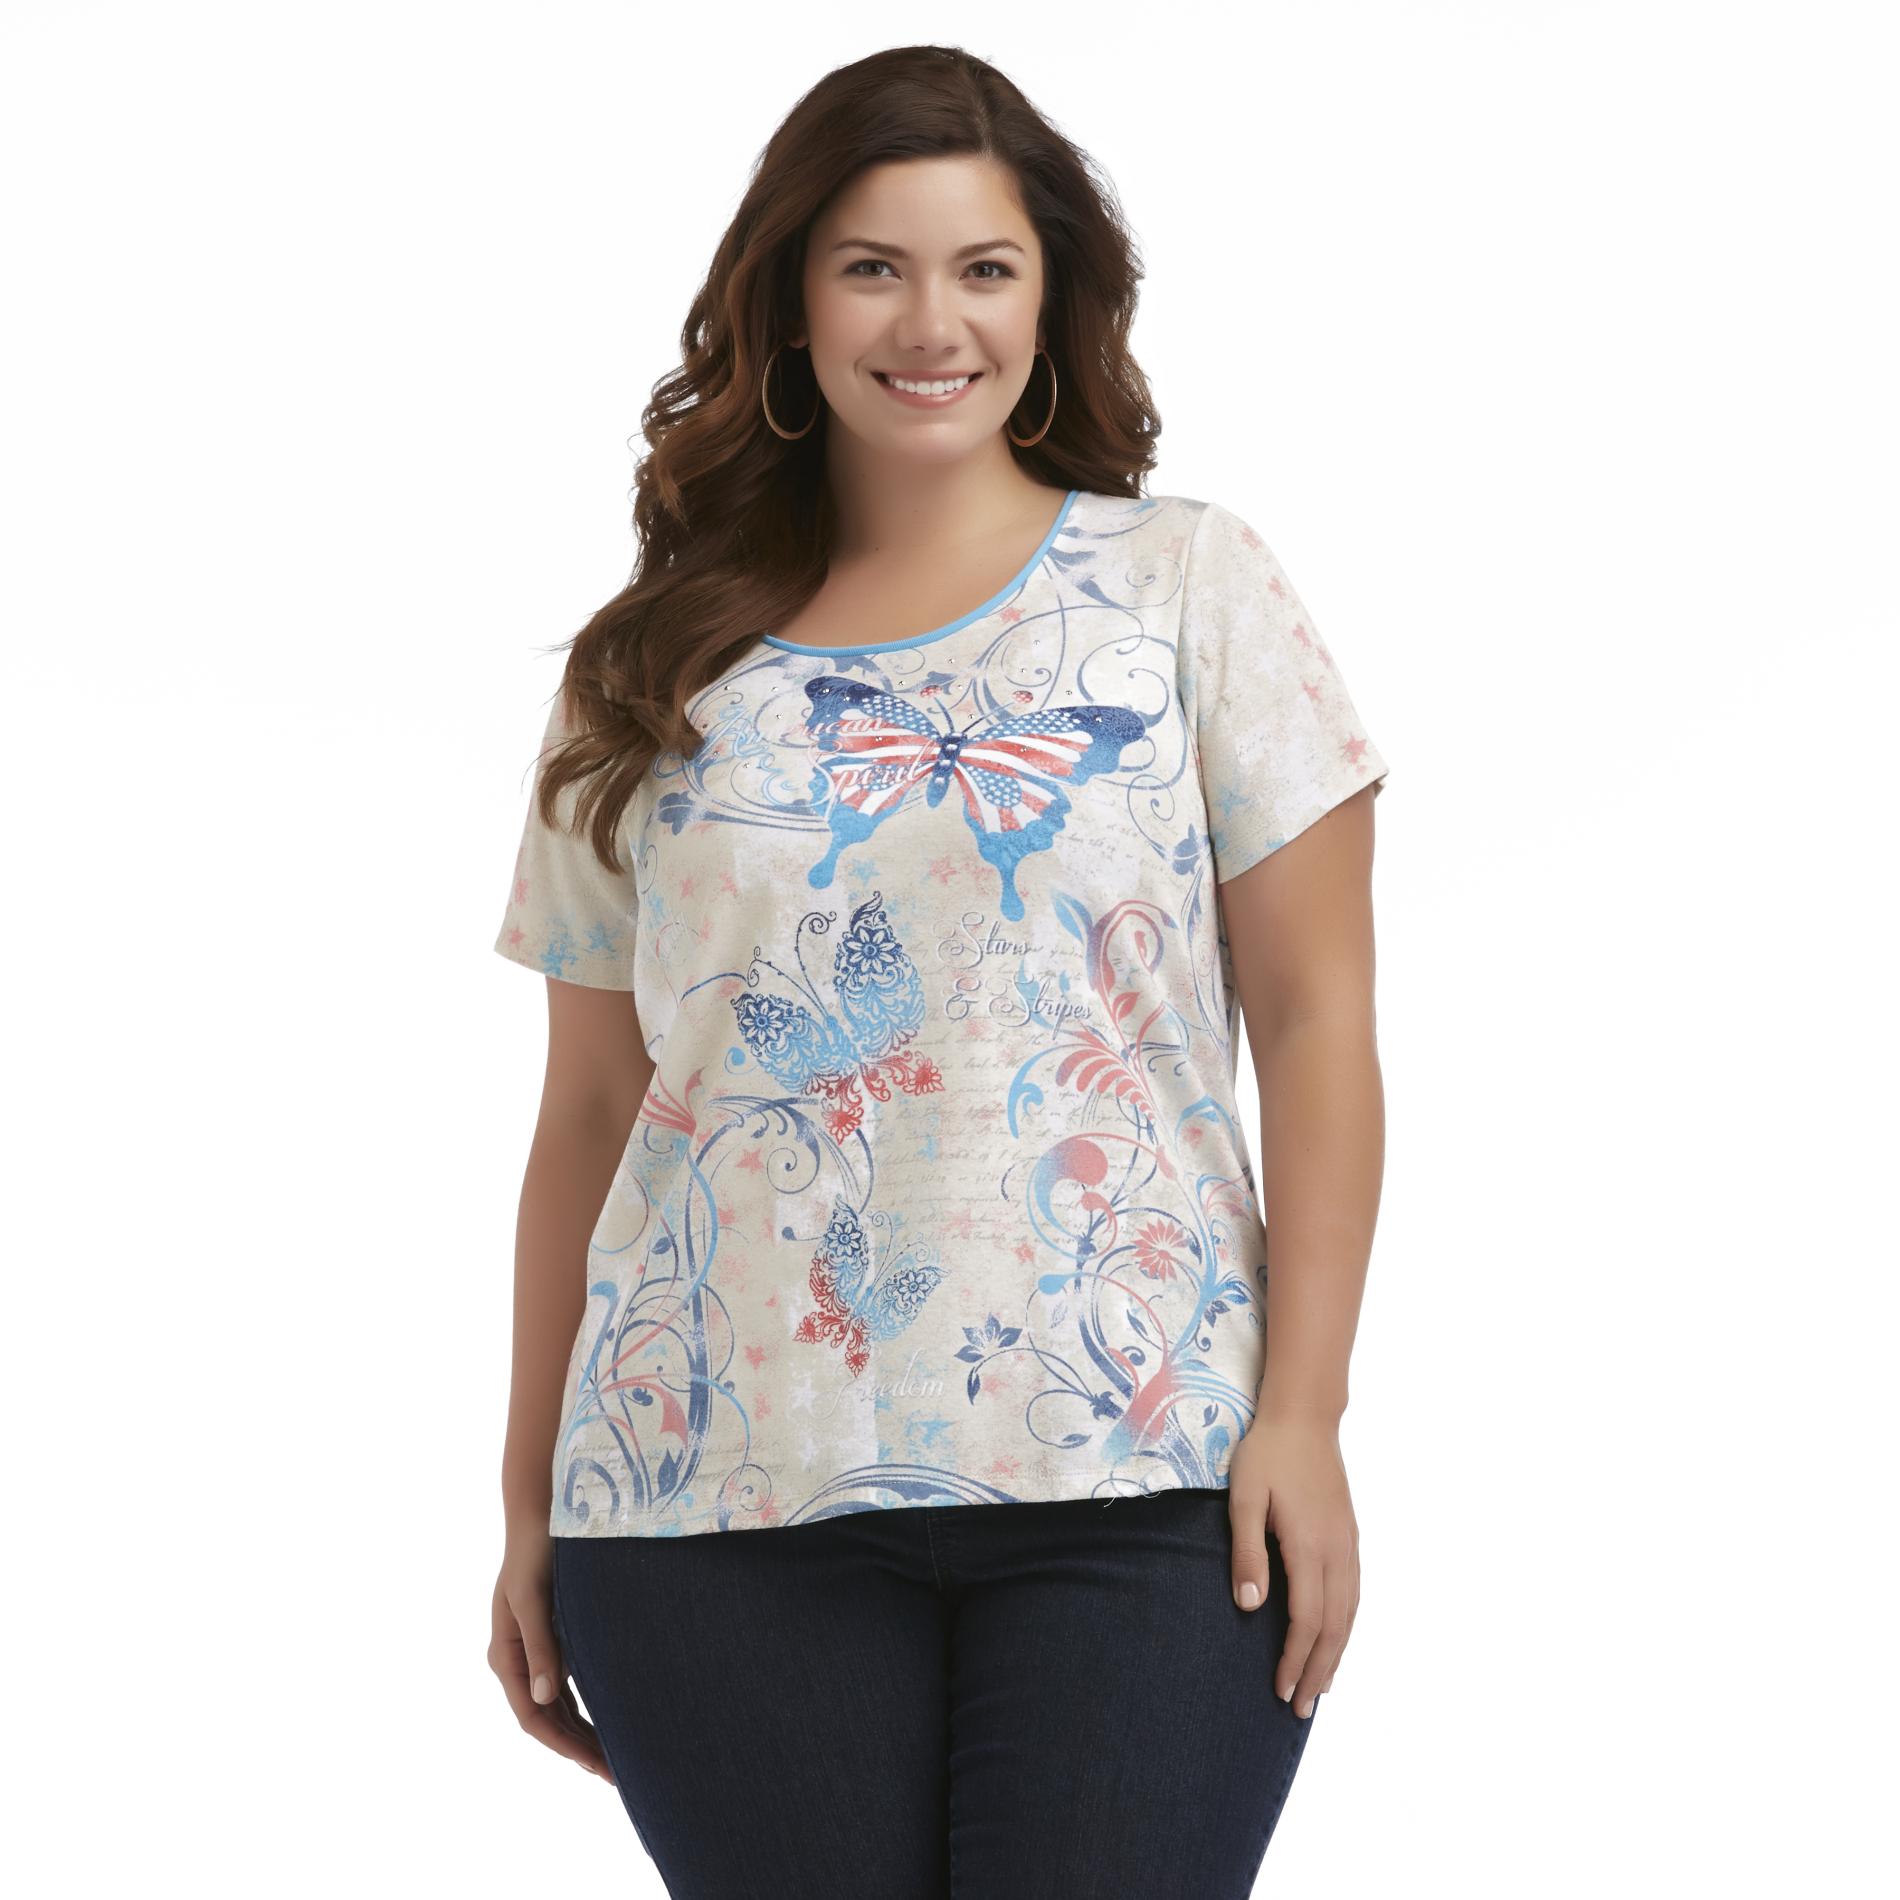 Holiday Editions Women's Plus Graphic Top - Butterflies